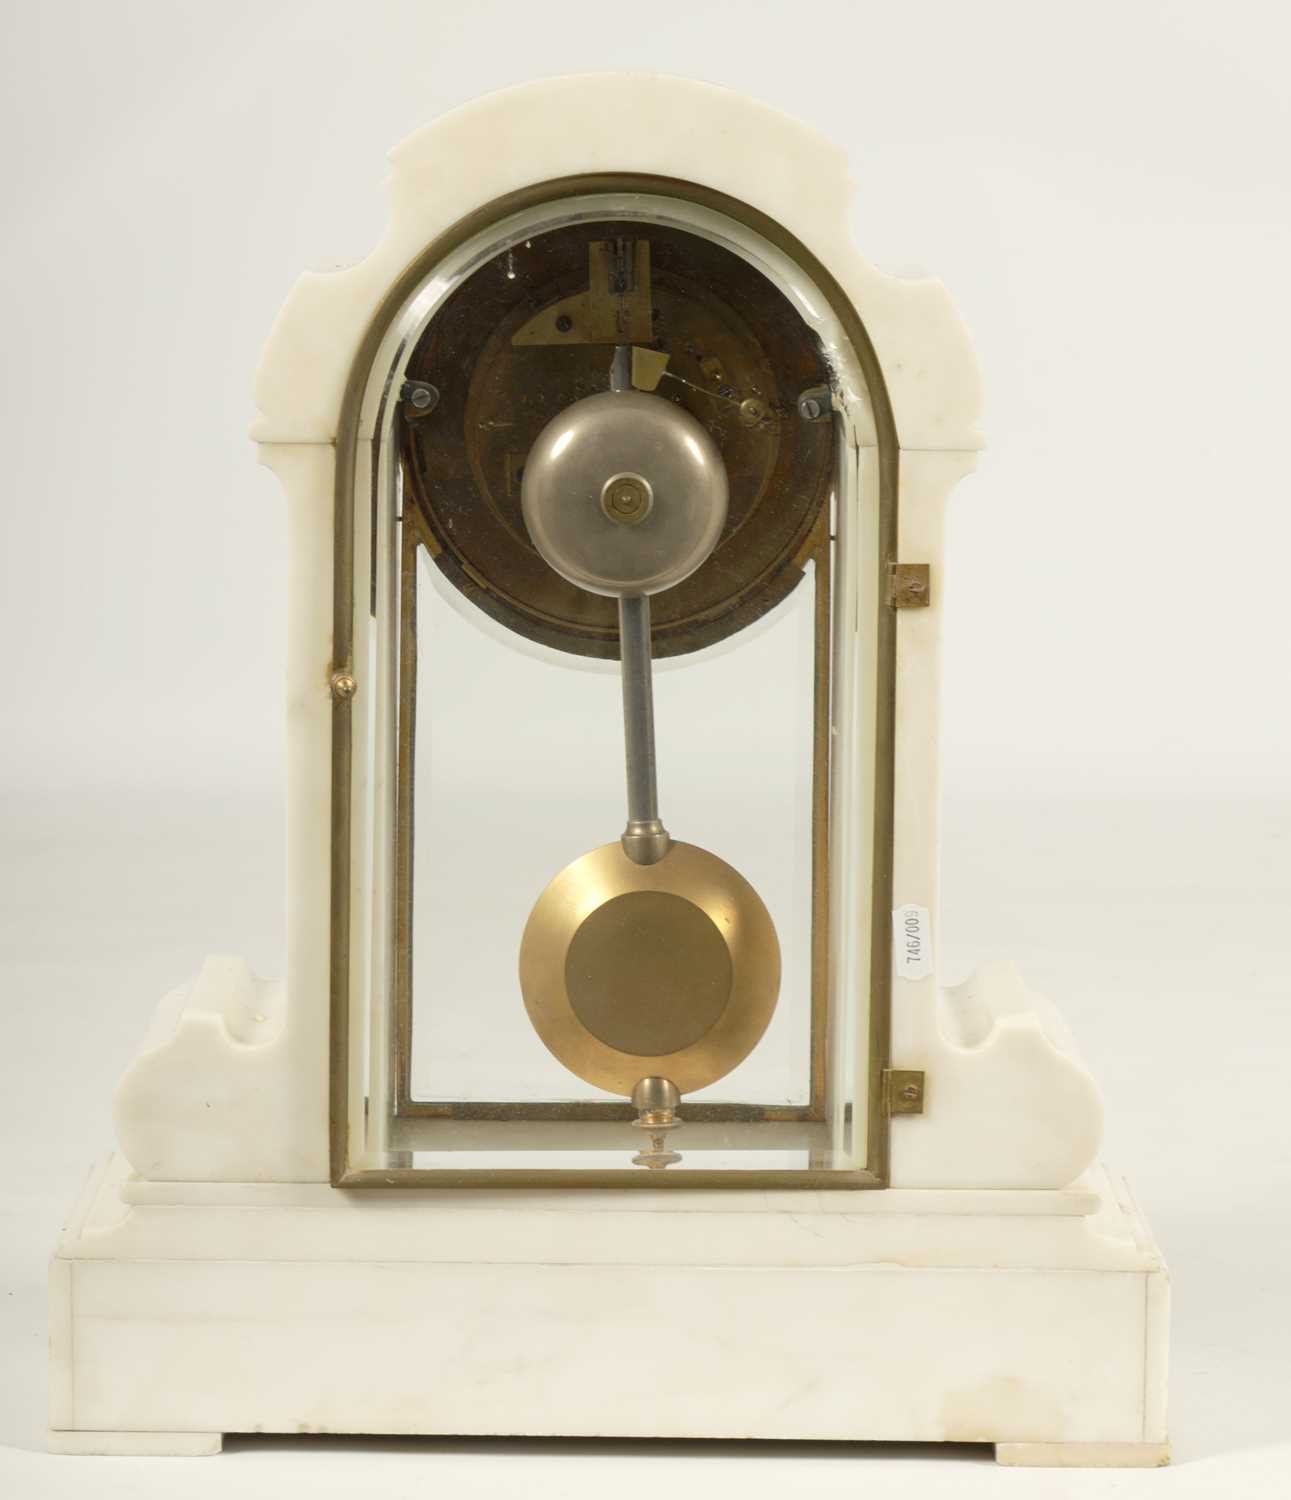 A LATE 19TH CENTURY FRENCH WHITE MARBLE MANTEL CLOCK - Image 10 of 12